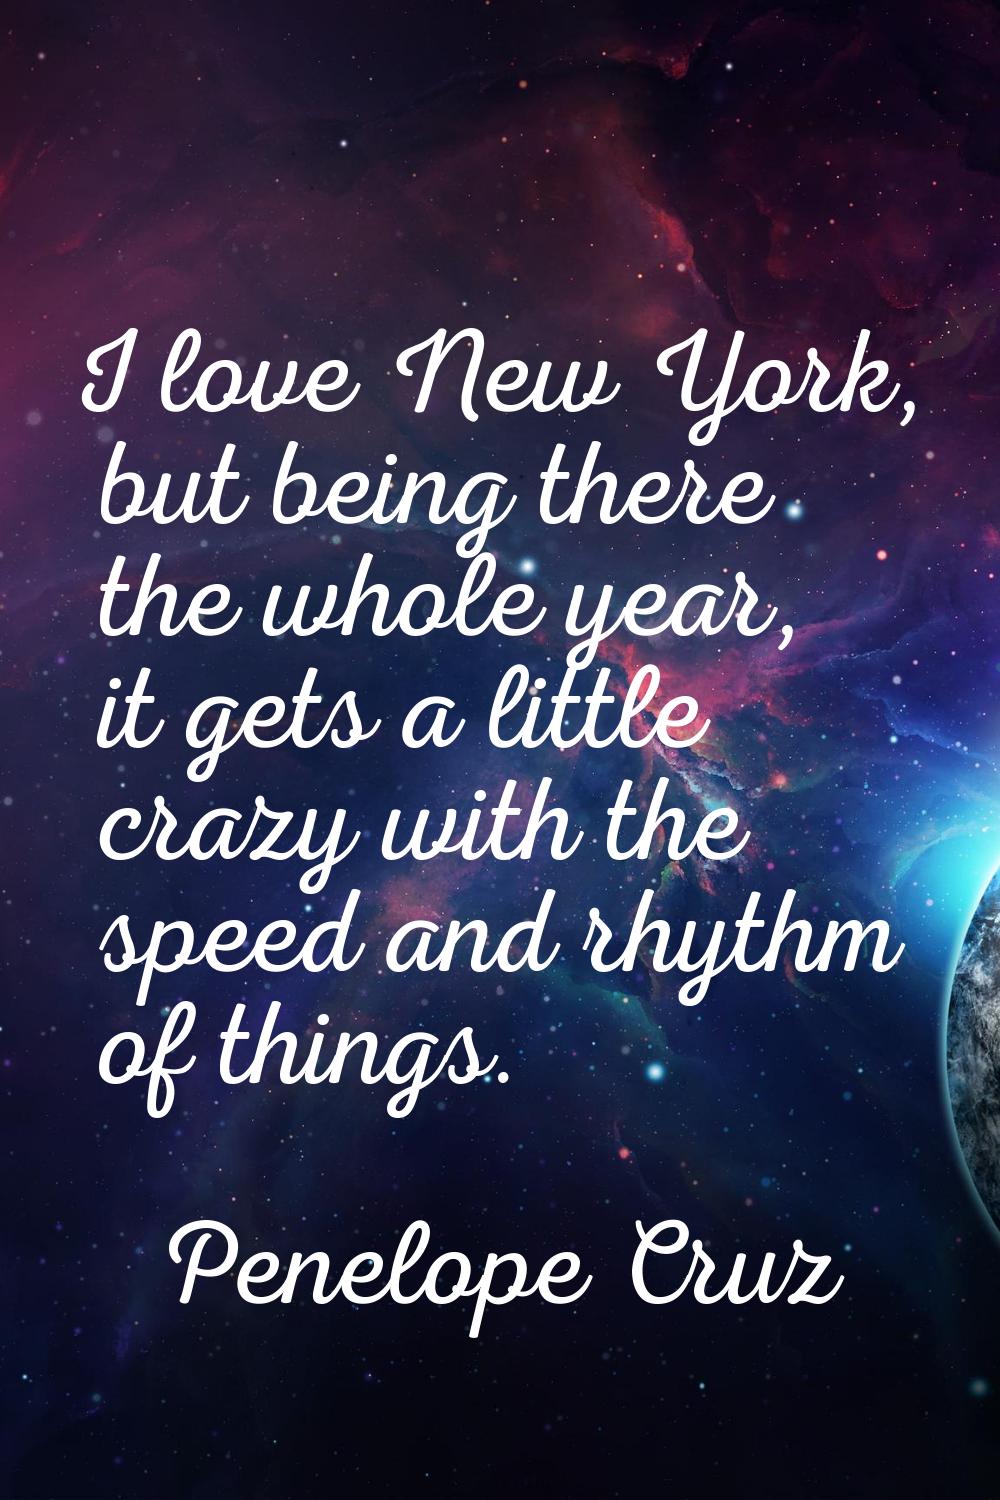 I love New York, but being there the whole year, it gets a little crazy with the speed and rhythm o